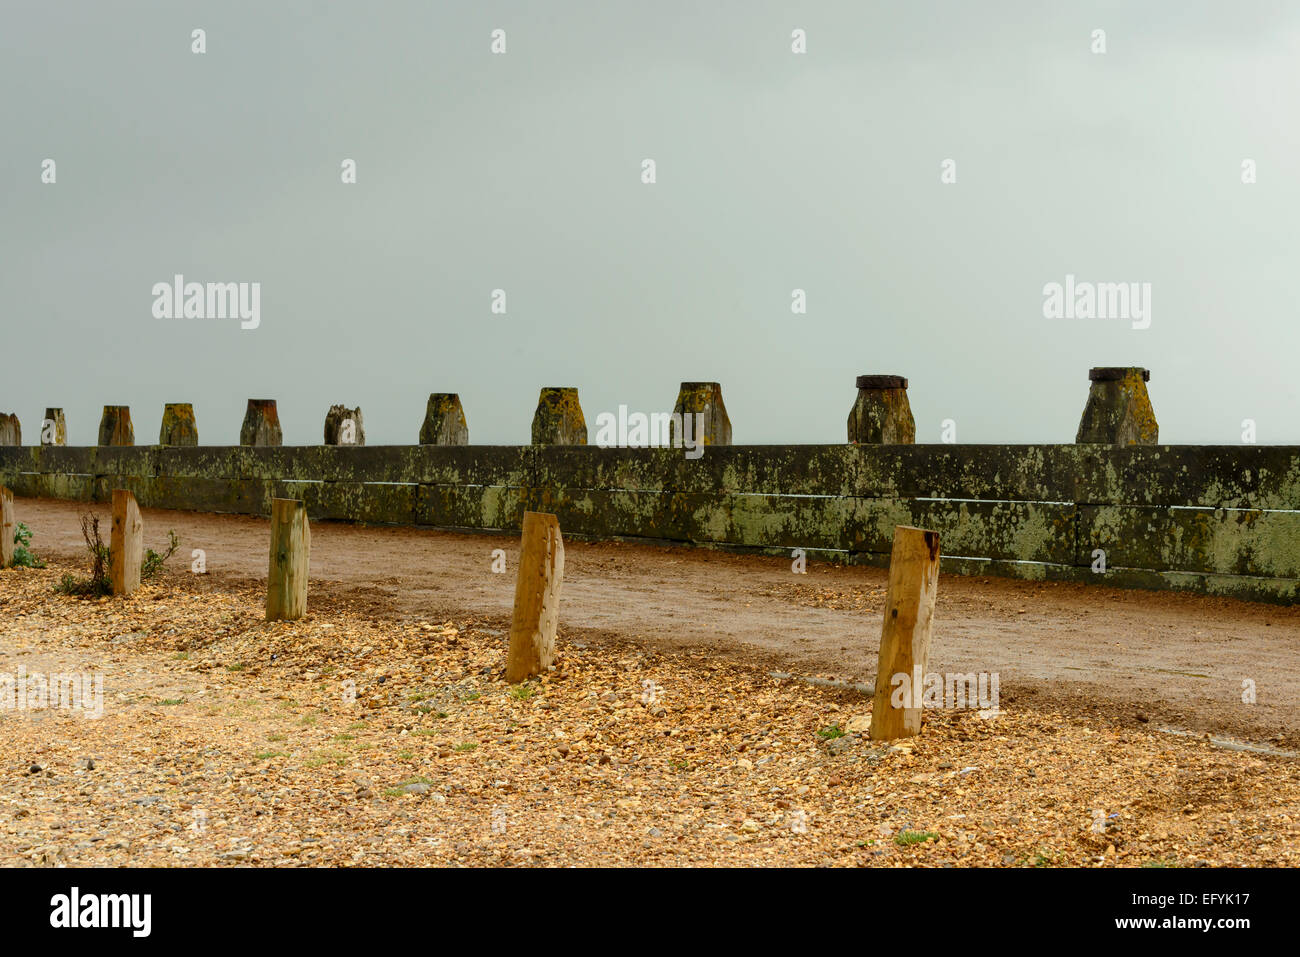 detail of foot path delimitation at shingle beach of touristic location, shot under bright cloudy sky Stock Photo